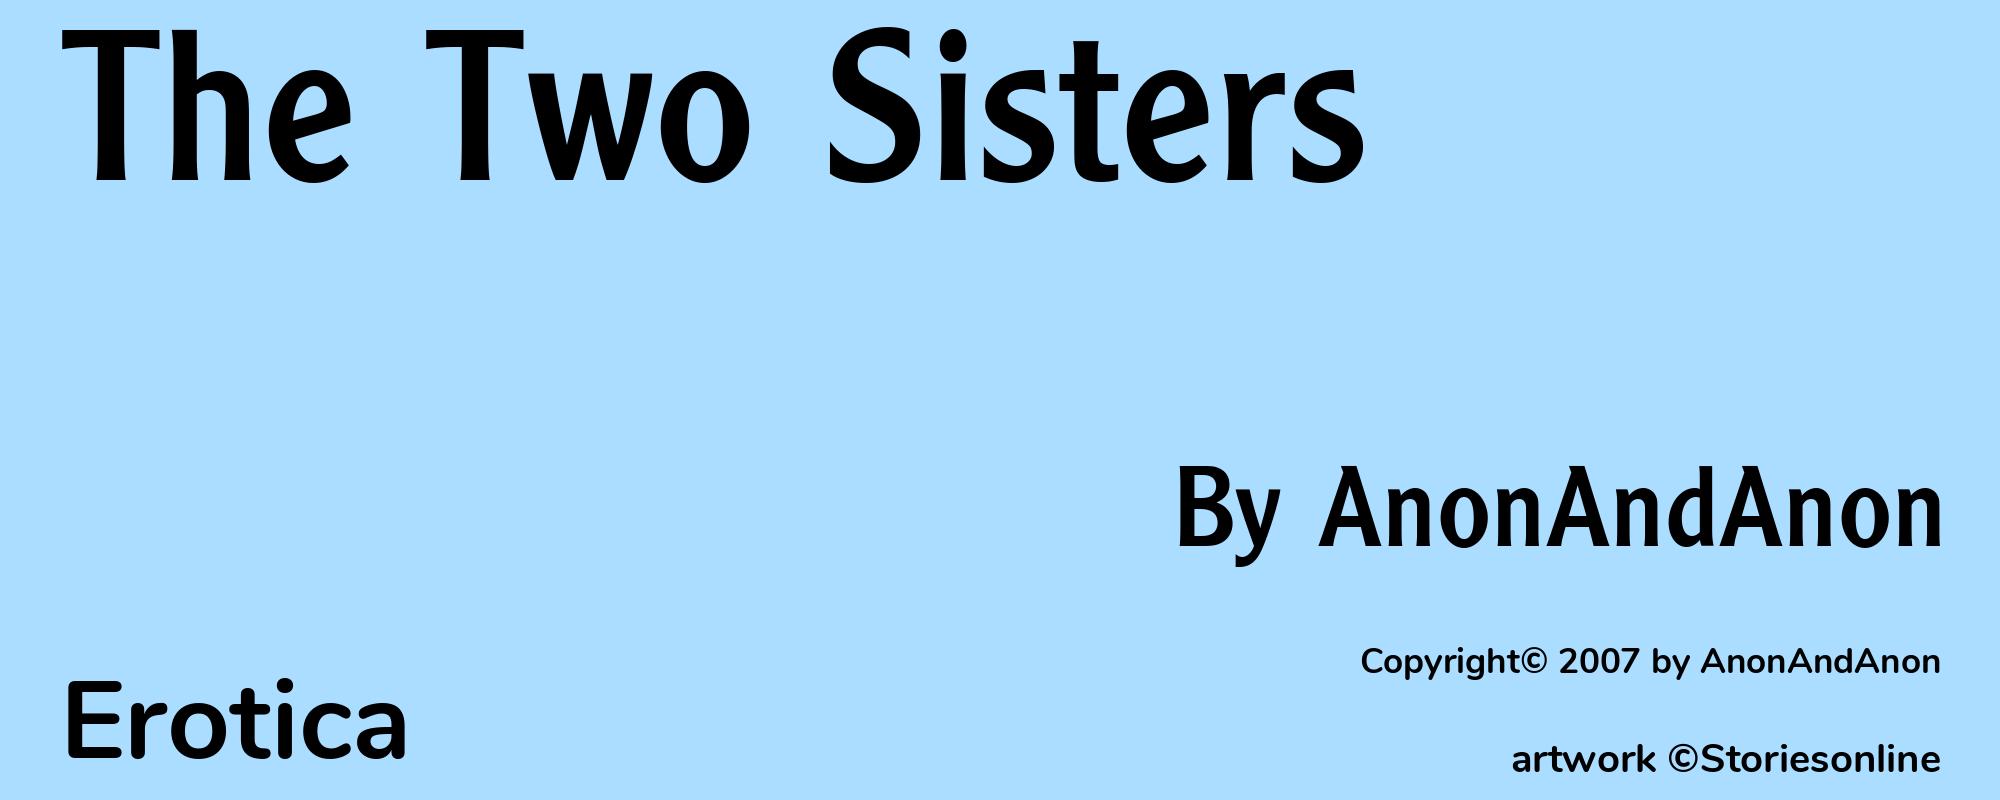 The Two Sisters - Cover